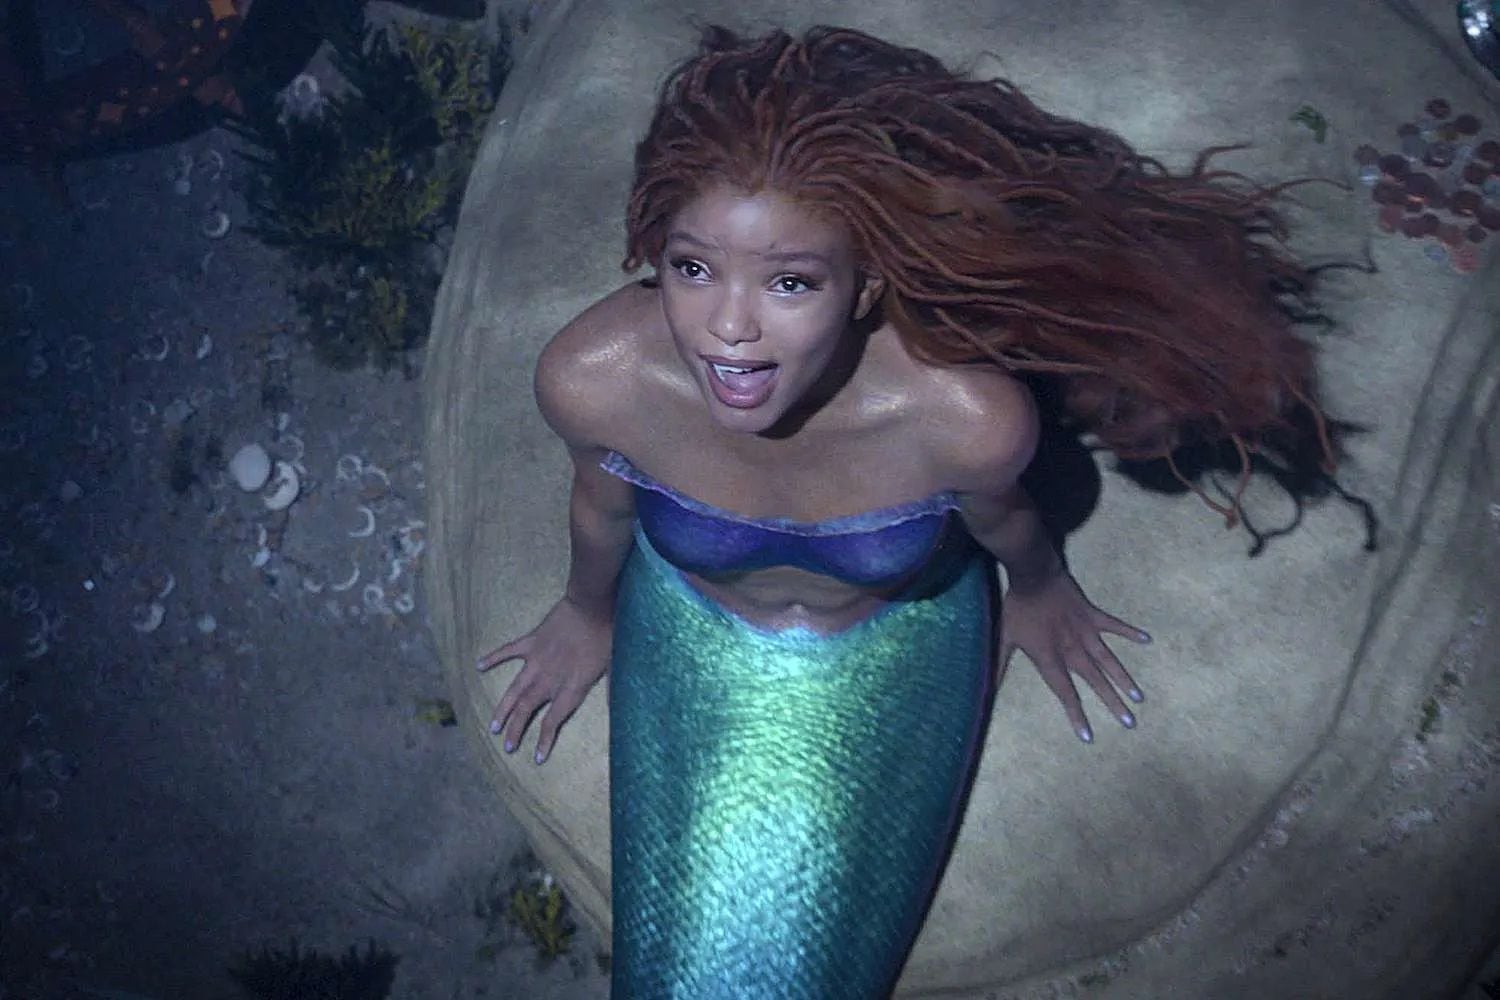 Jam Out to Our Summer Mermaid Playlist